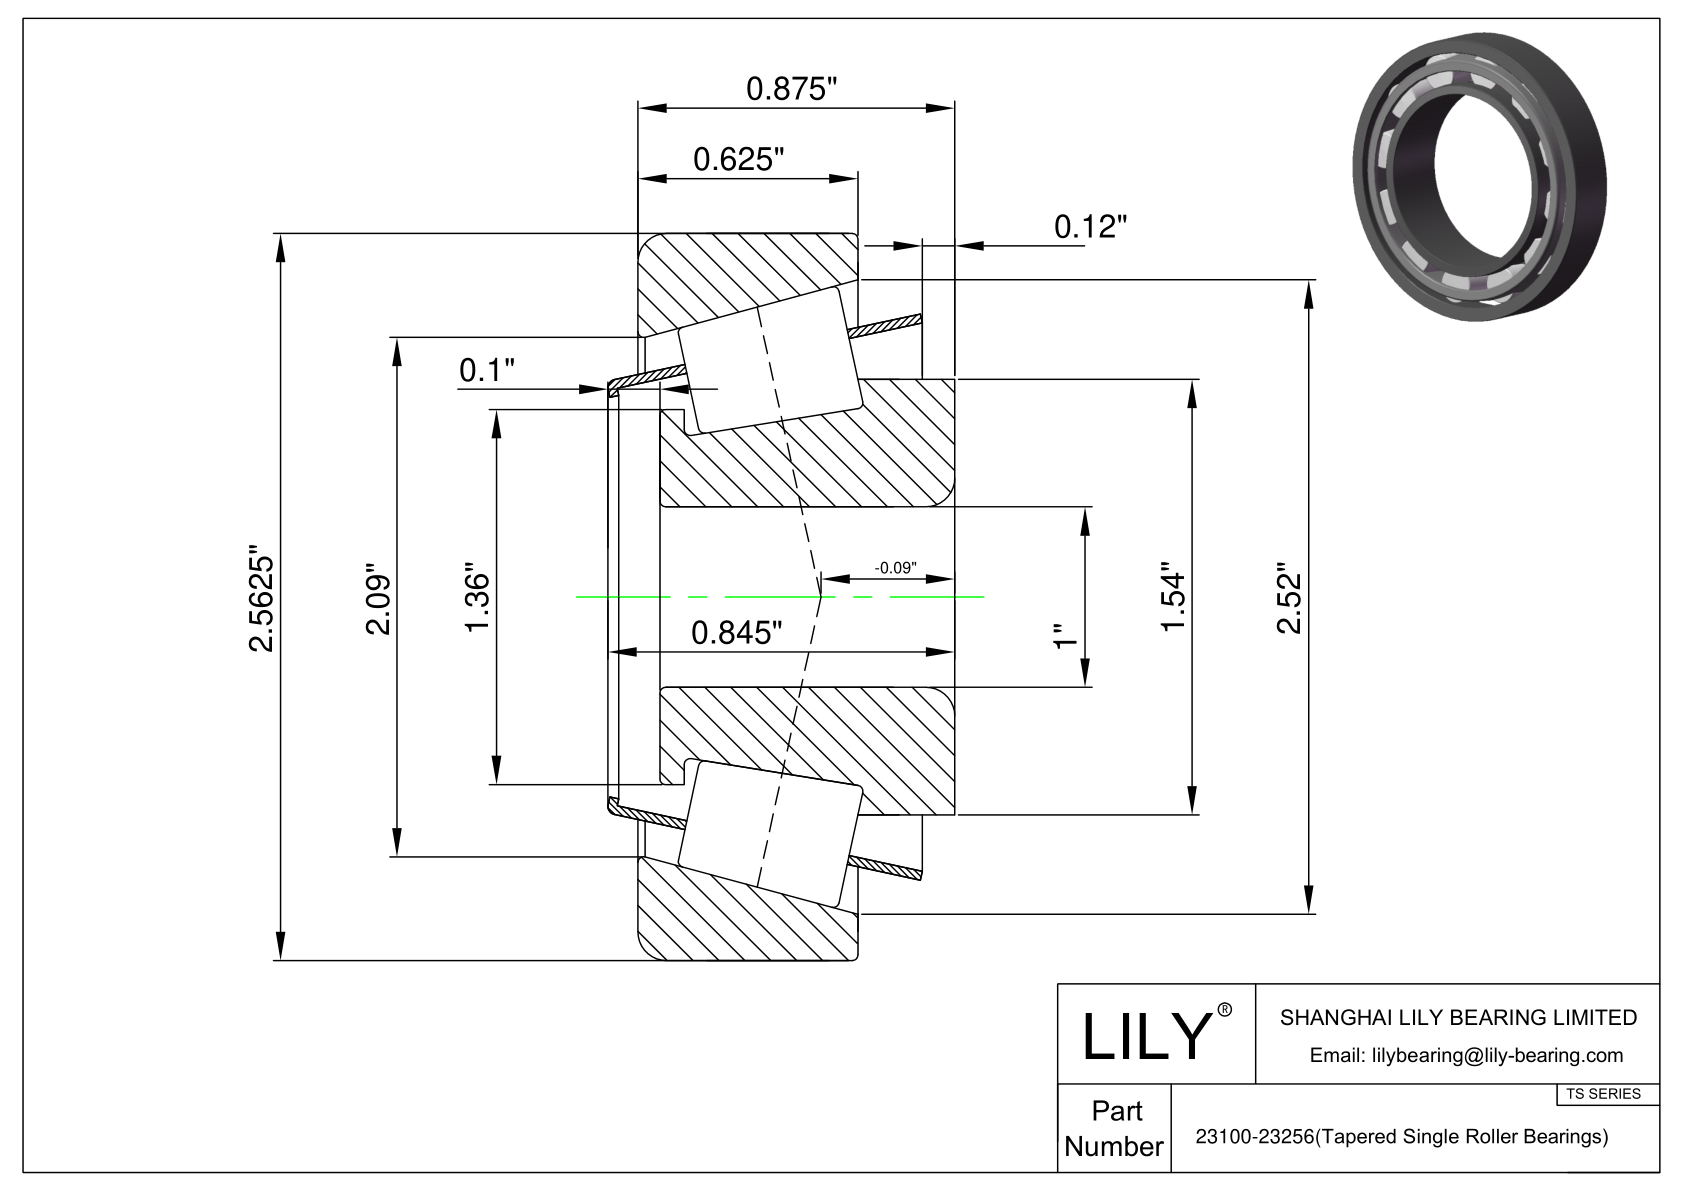 23100-23256 TS (Tapered Single Roller Bearings) (Imperial) cad drawing